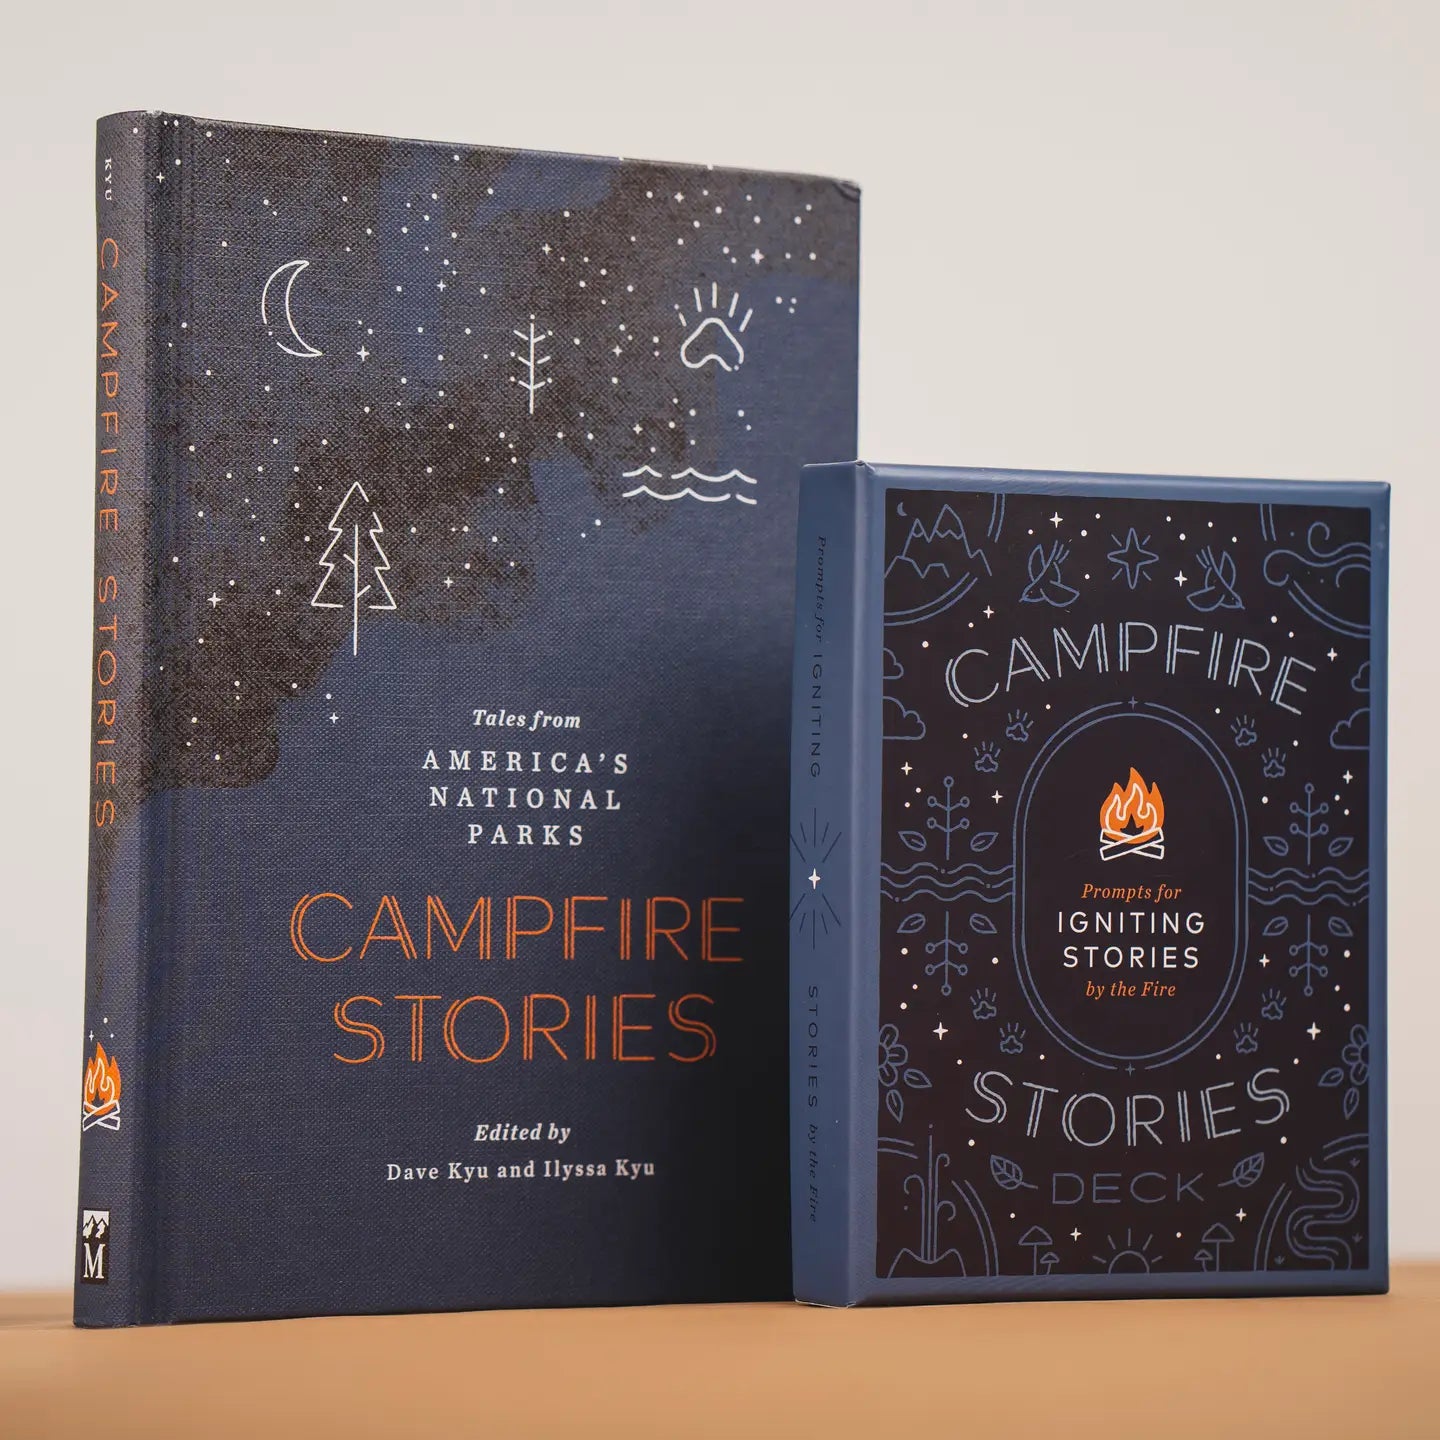 Campfire Stories Deck (Prompts For Igniting Stories)